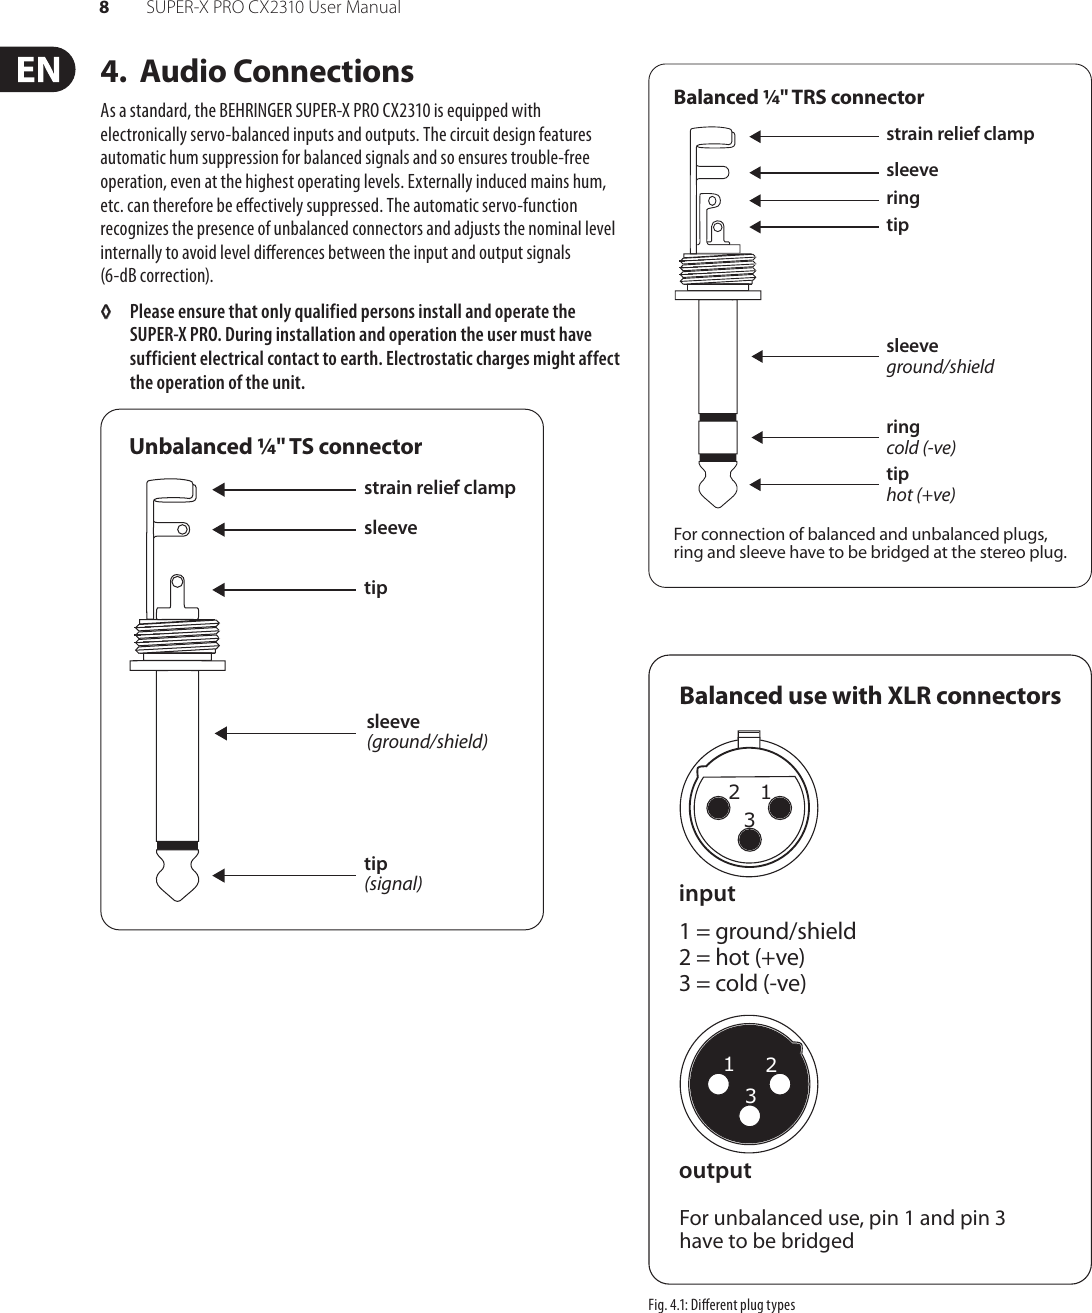 Page 8 of 10 - Behringer Behringer-Super-X-Pro-Cx2310-Users-Manual- SUPER-X PRO CX2310  Behringer-super-x-pro-cx2310-users-manual